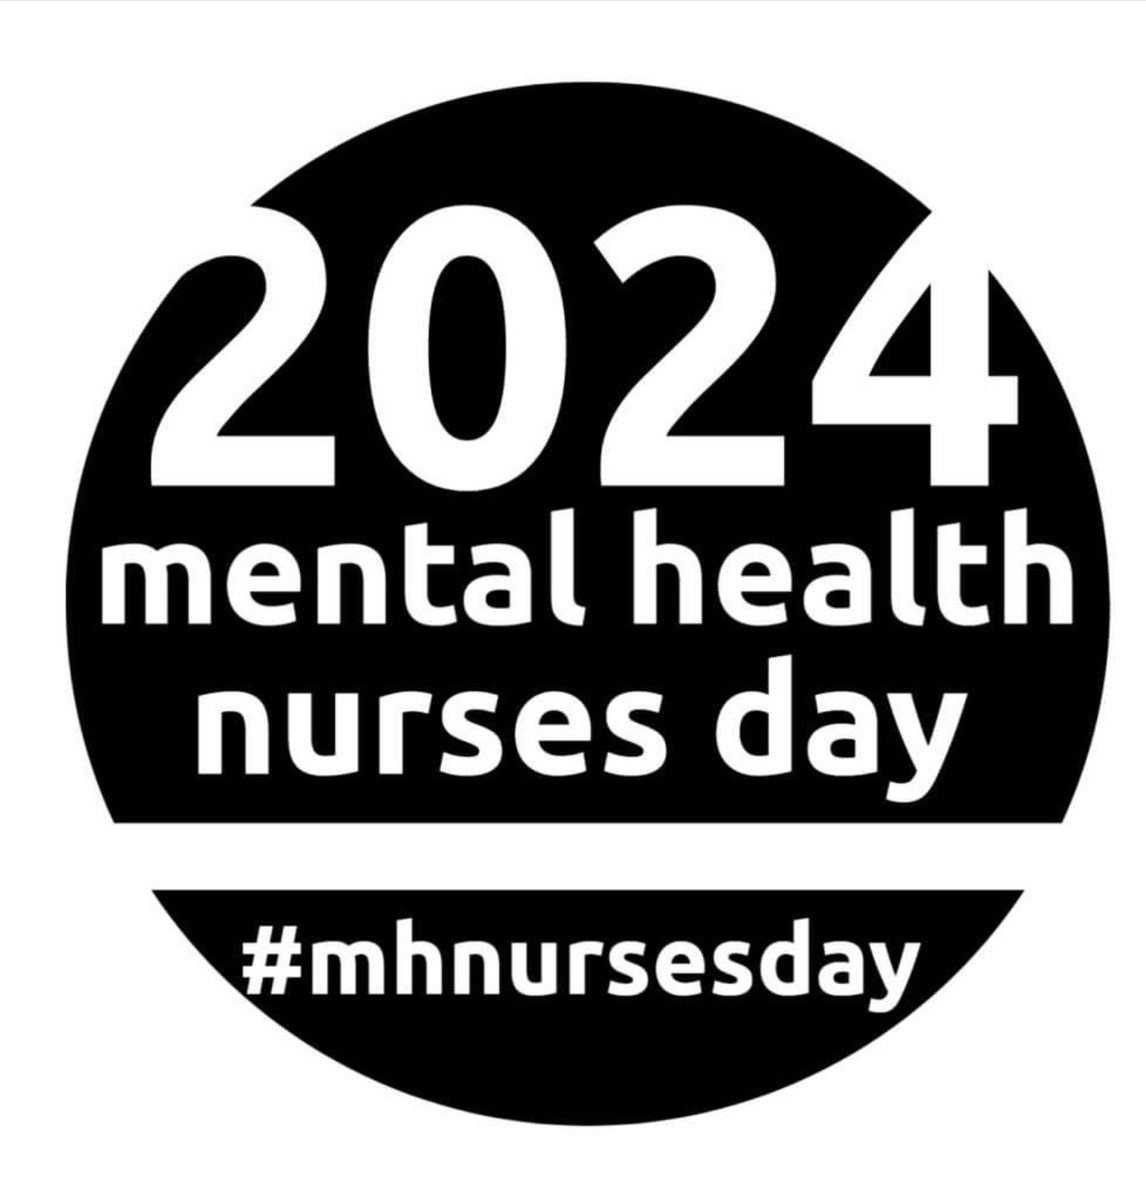 Wishing all our mental health nurses @cwpnhs a happy mental health nurses day! Thank you for all dedication and support you give to our patients❤️